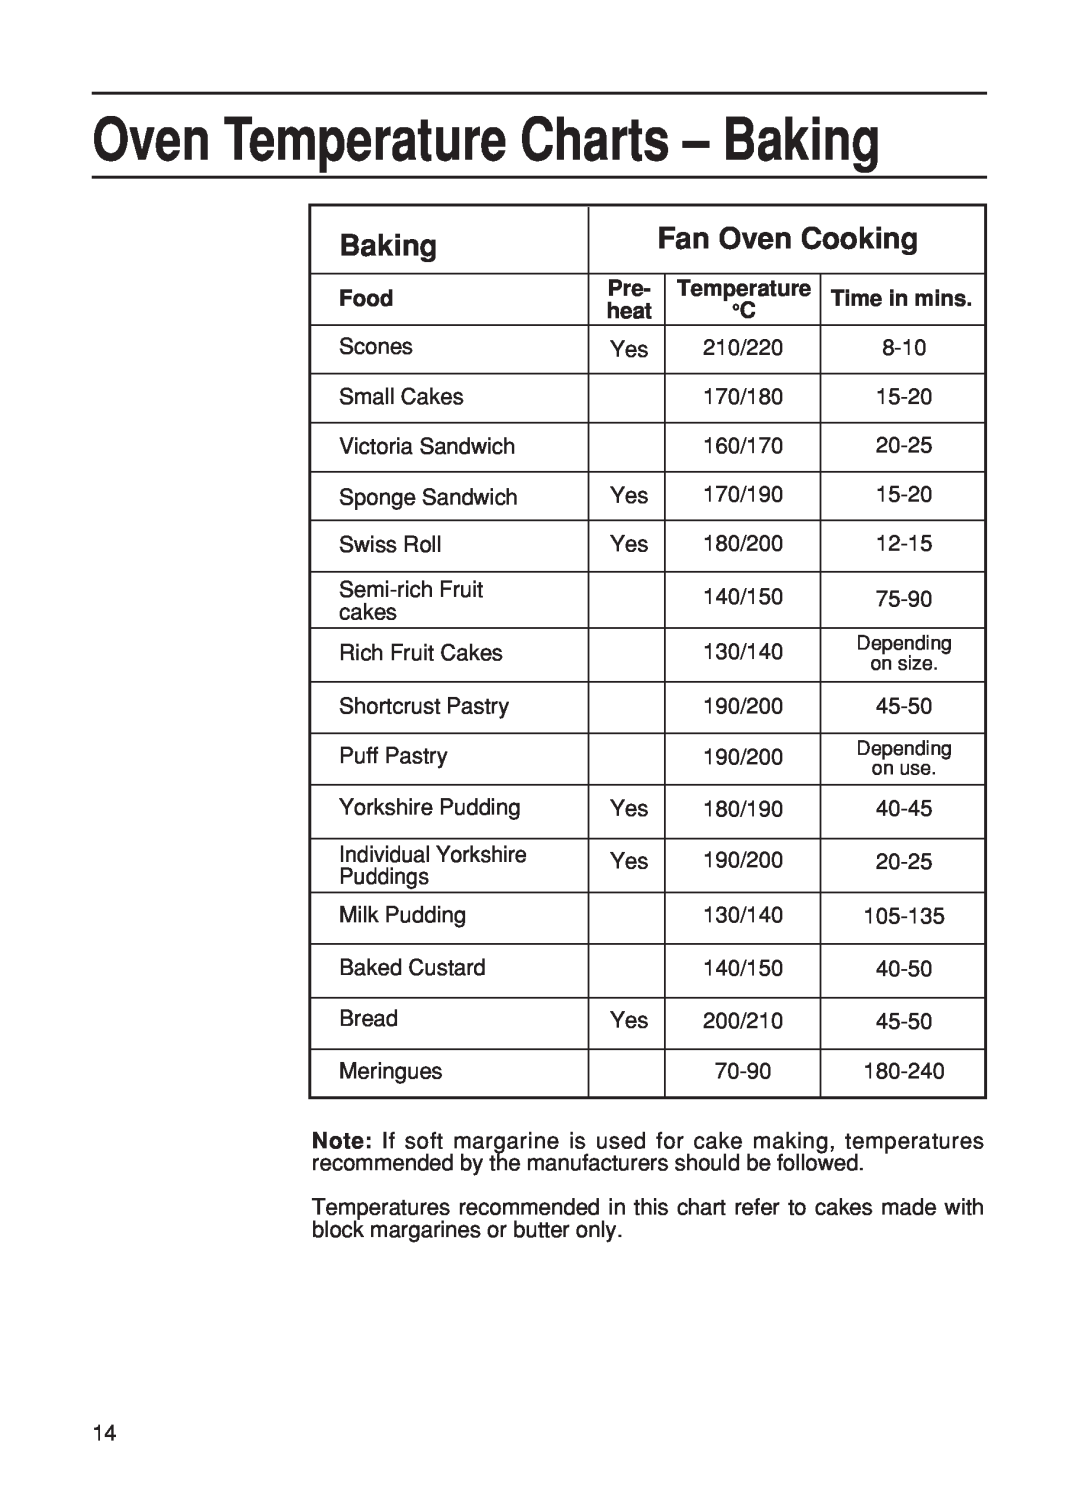 Hotpoint EG21 manual Oven Temperature Charts - Baking, Fan Oven Cooking 